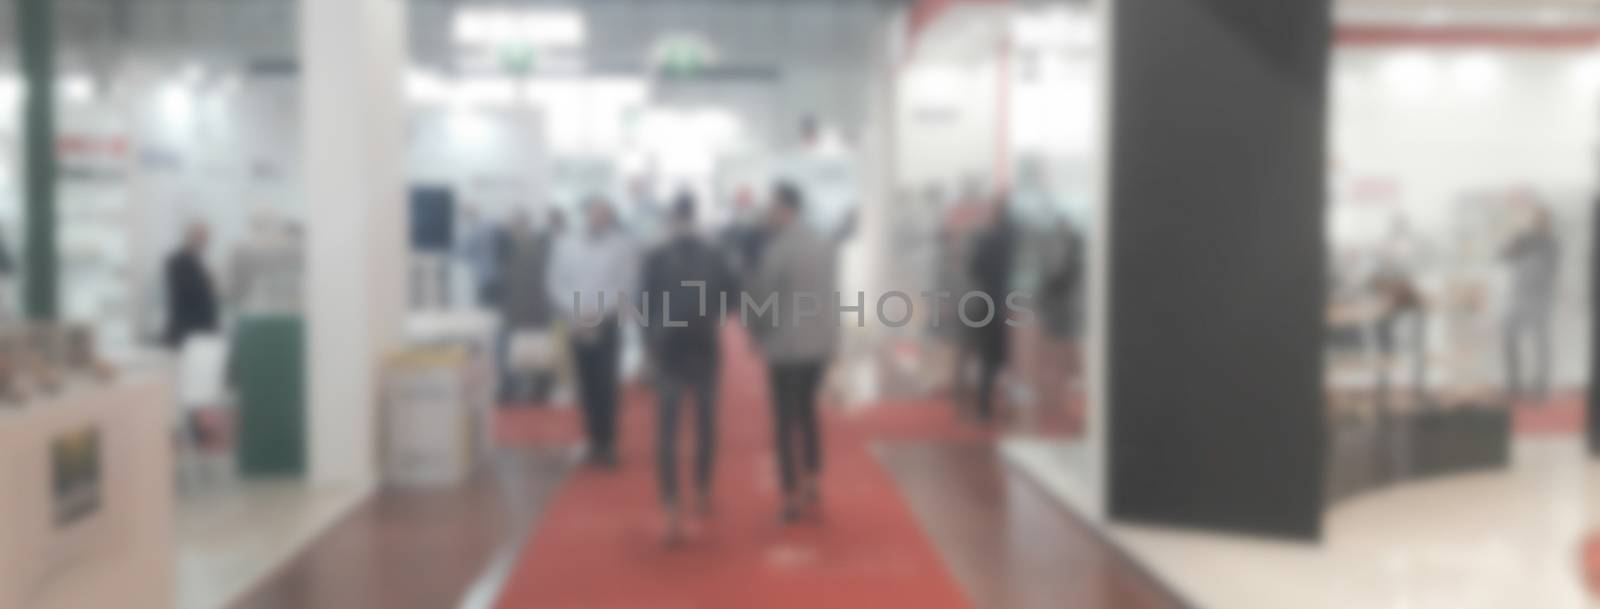 Defocused background of a trade show with people visiting the commercial exhibition. Intentionally blurred post production for bokeh effect